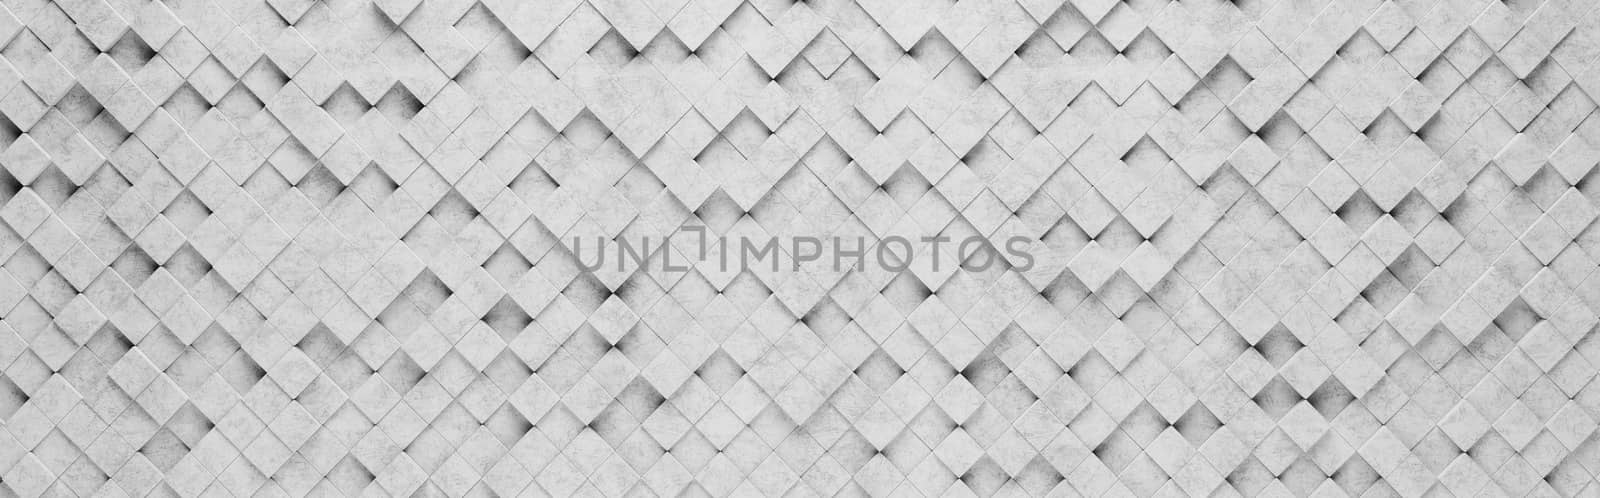 Wall of Small Gray Squares Tiles Arranged in Random Height 3D Pattern Background Illustration